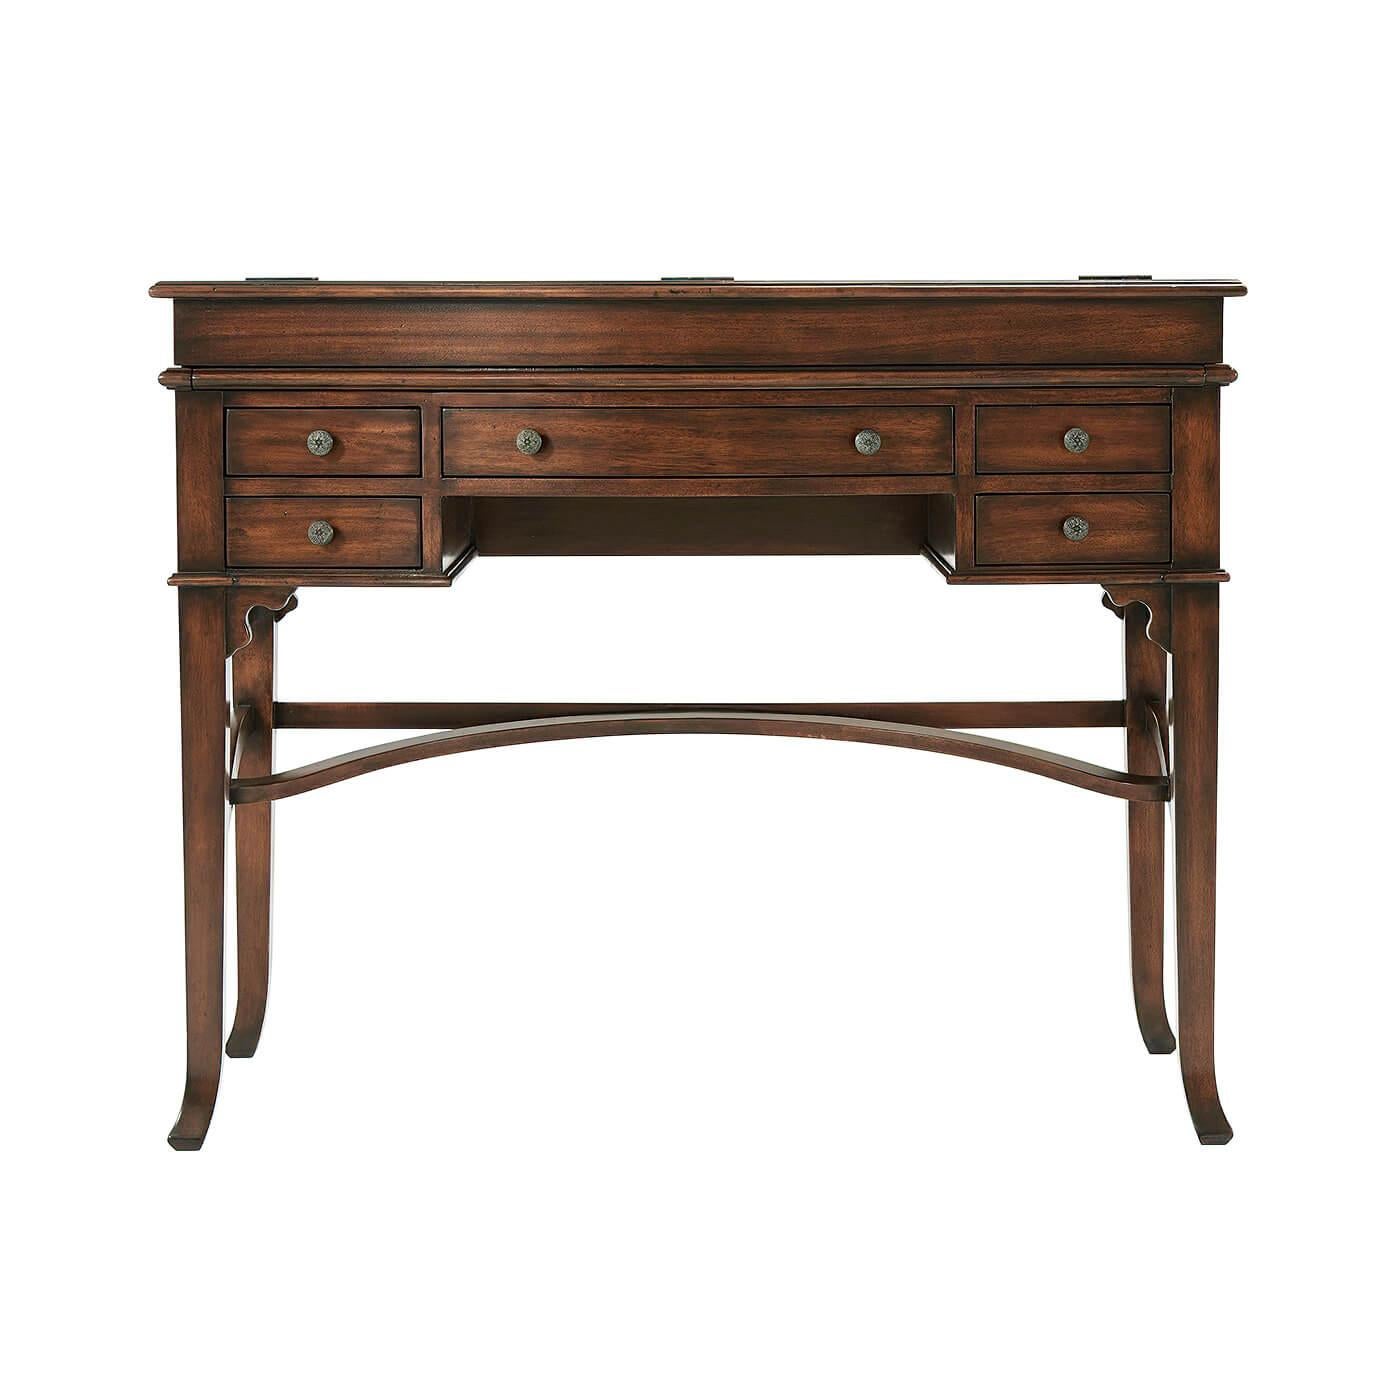 A Victorian-style bowfront Campaign desk, the flip-top enclosing a fitted interior and a leather writing surface, with five drawers surrounding the kneehole, on tapering splay legs joined by stretchers.

Dimensions: 42